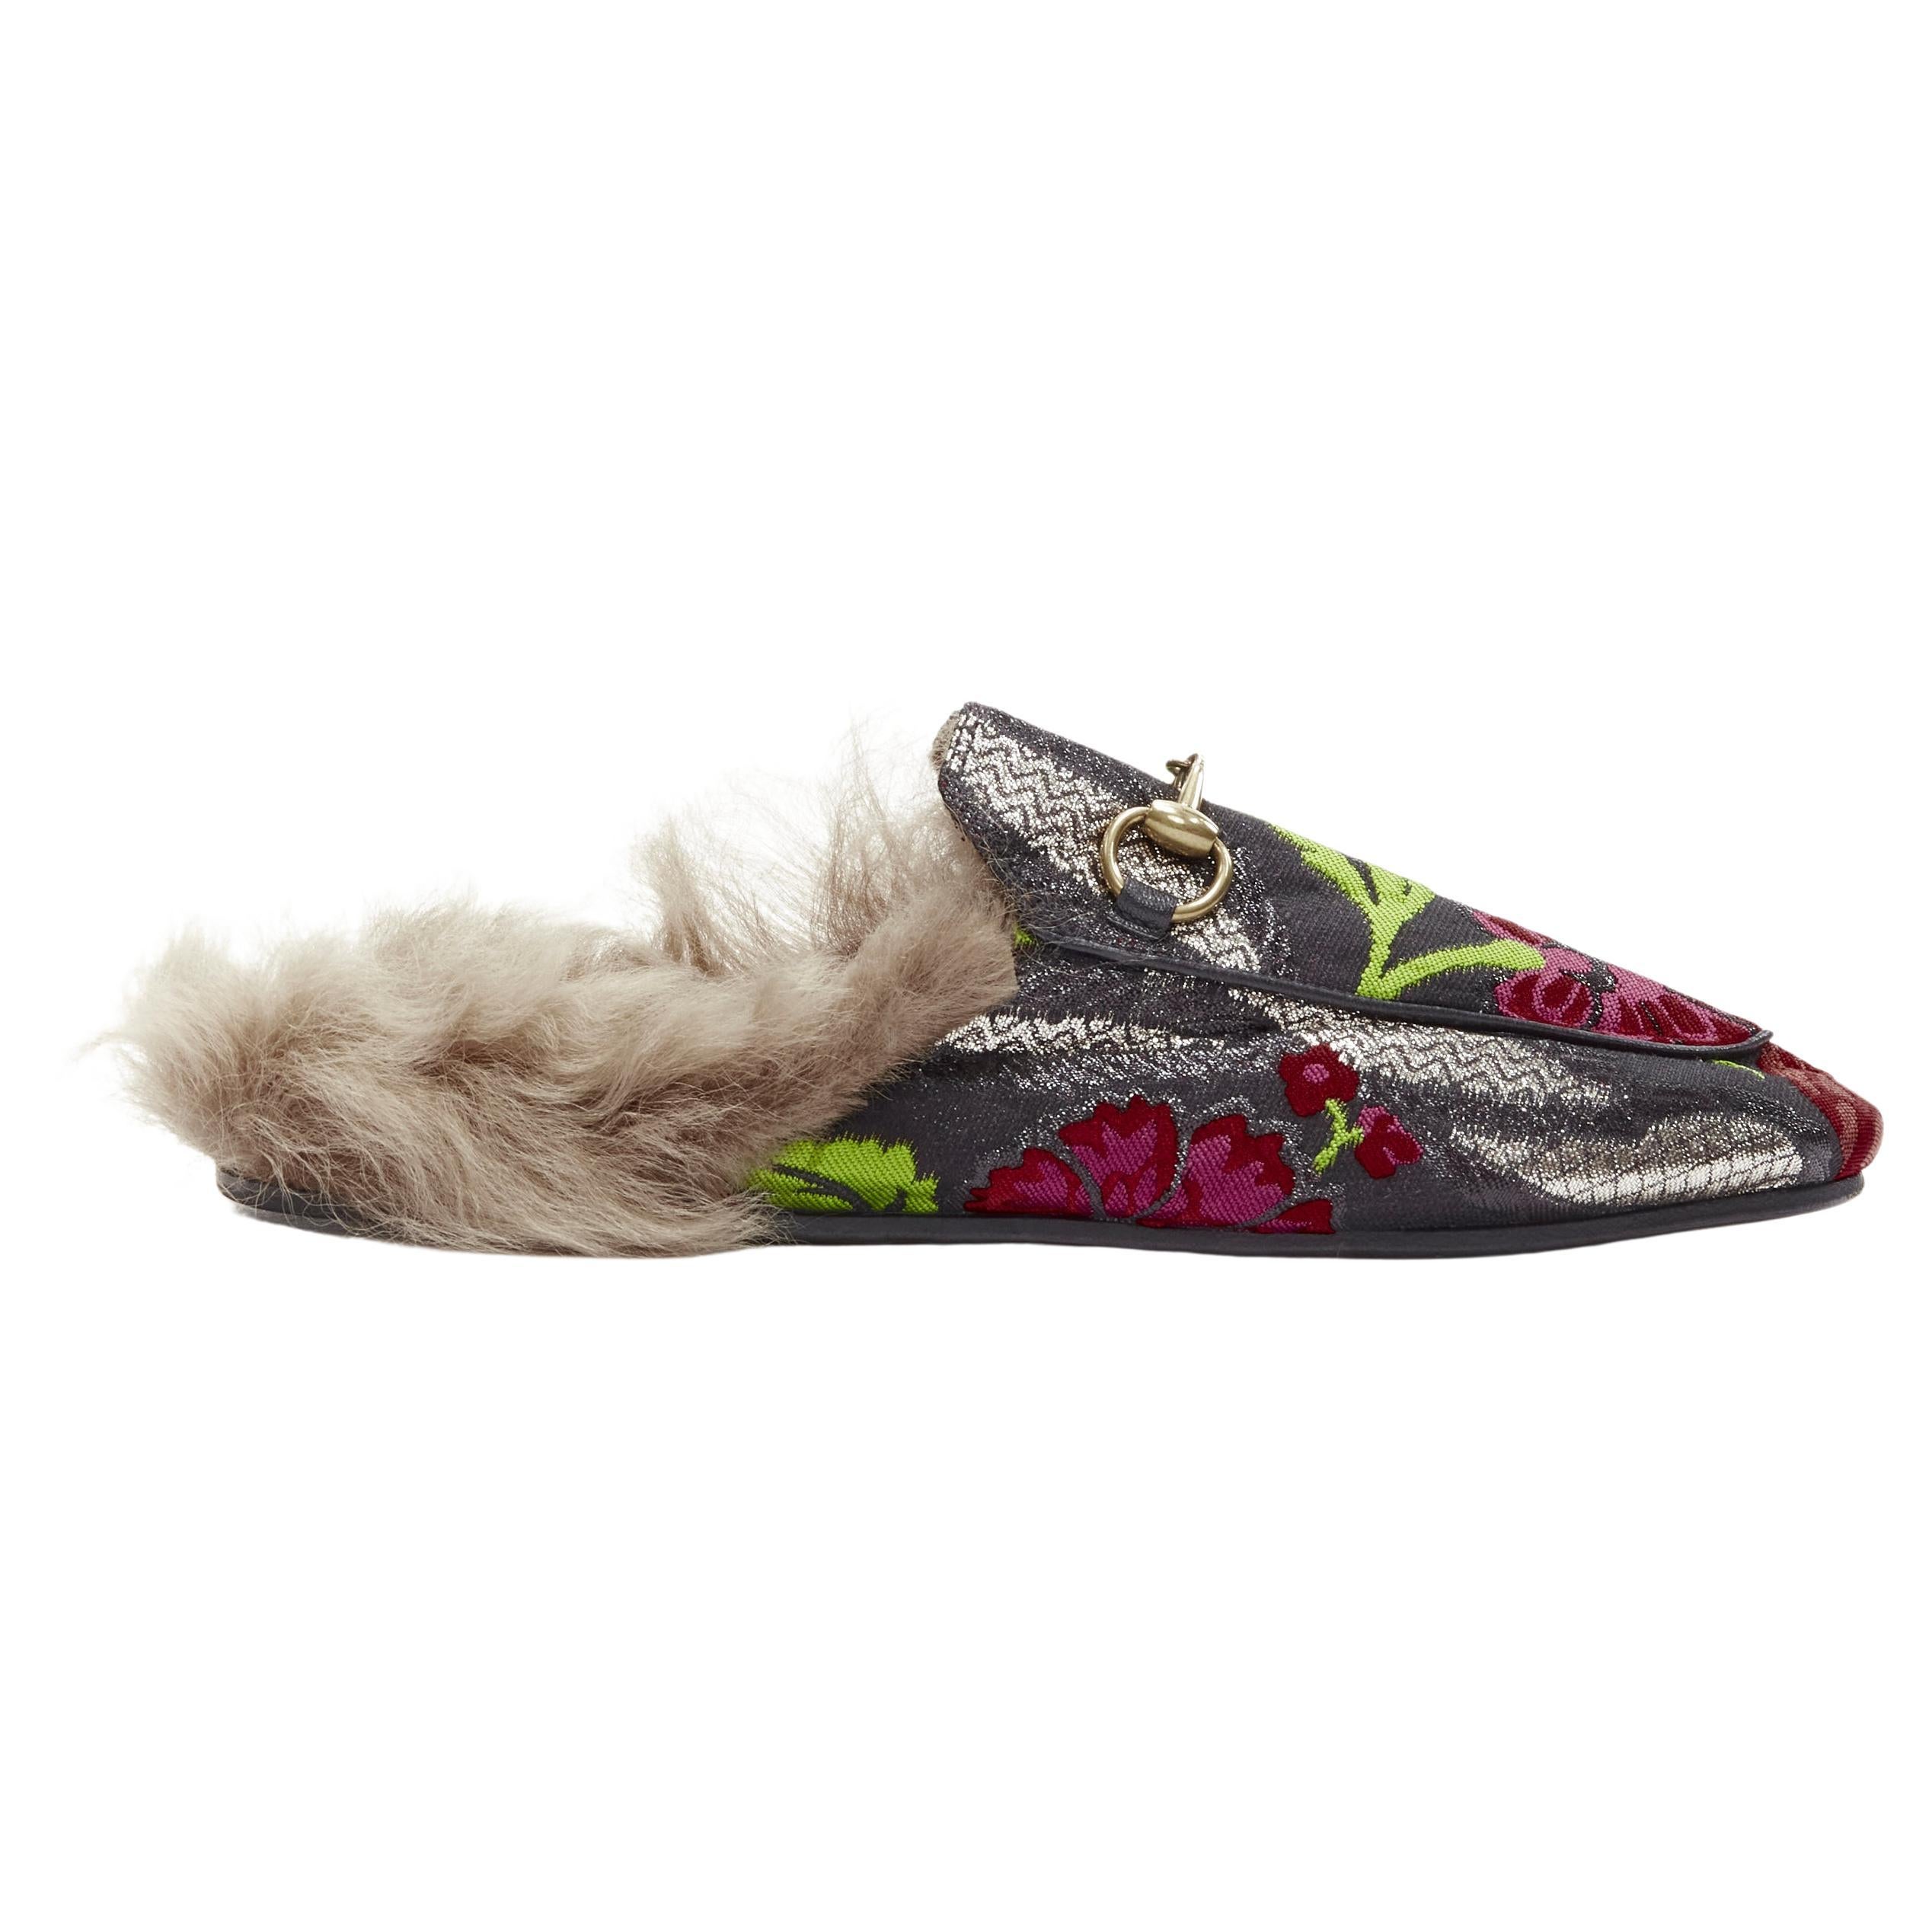 GUCCI Alessandro Michele Princetown floral jacquard fur lined loafer EU36 For Sale